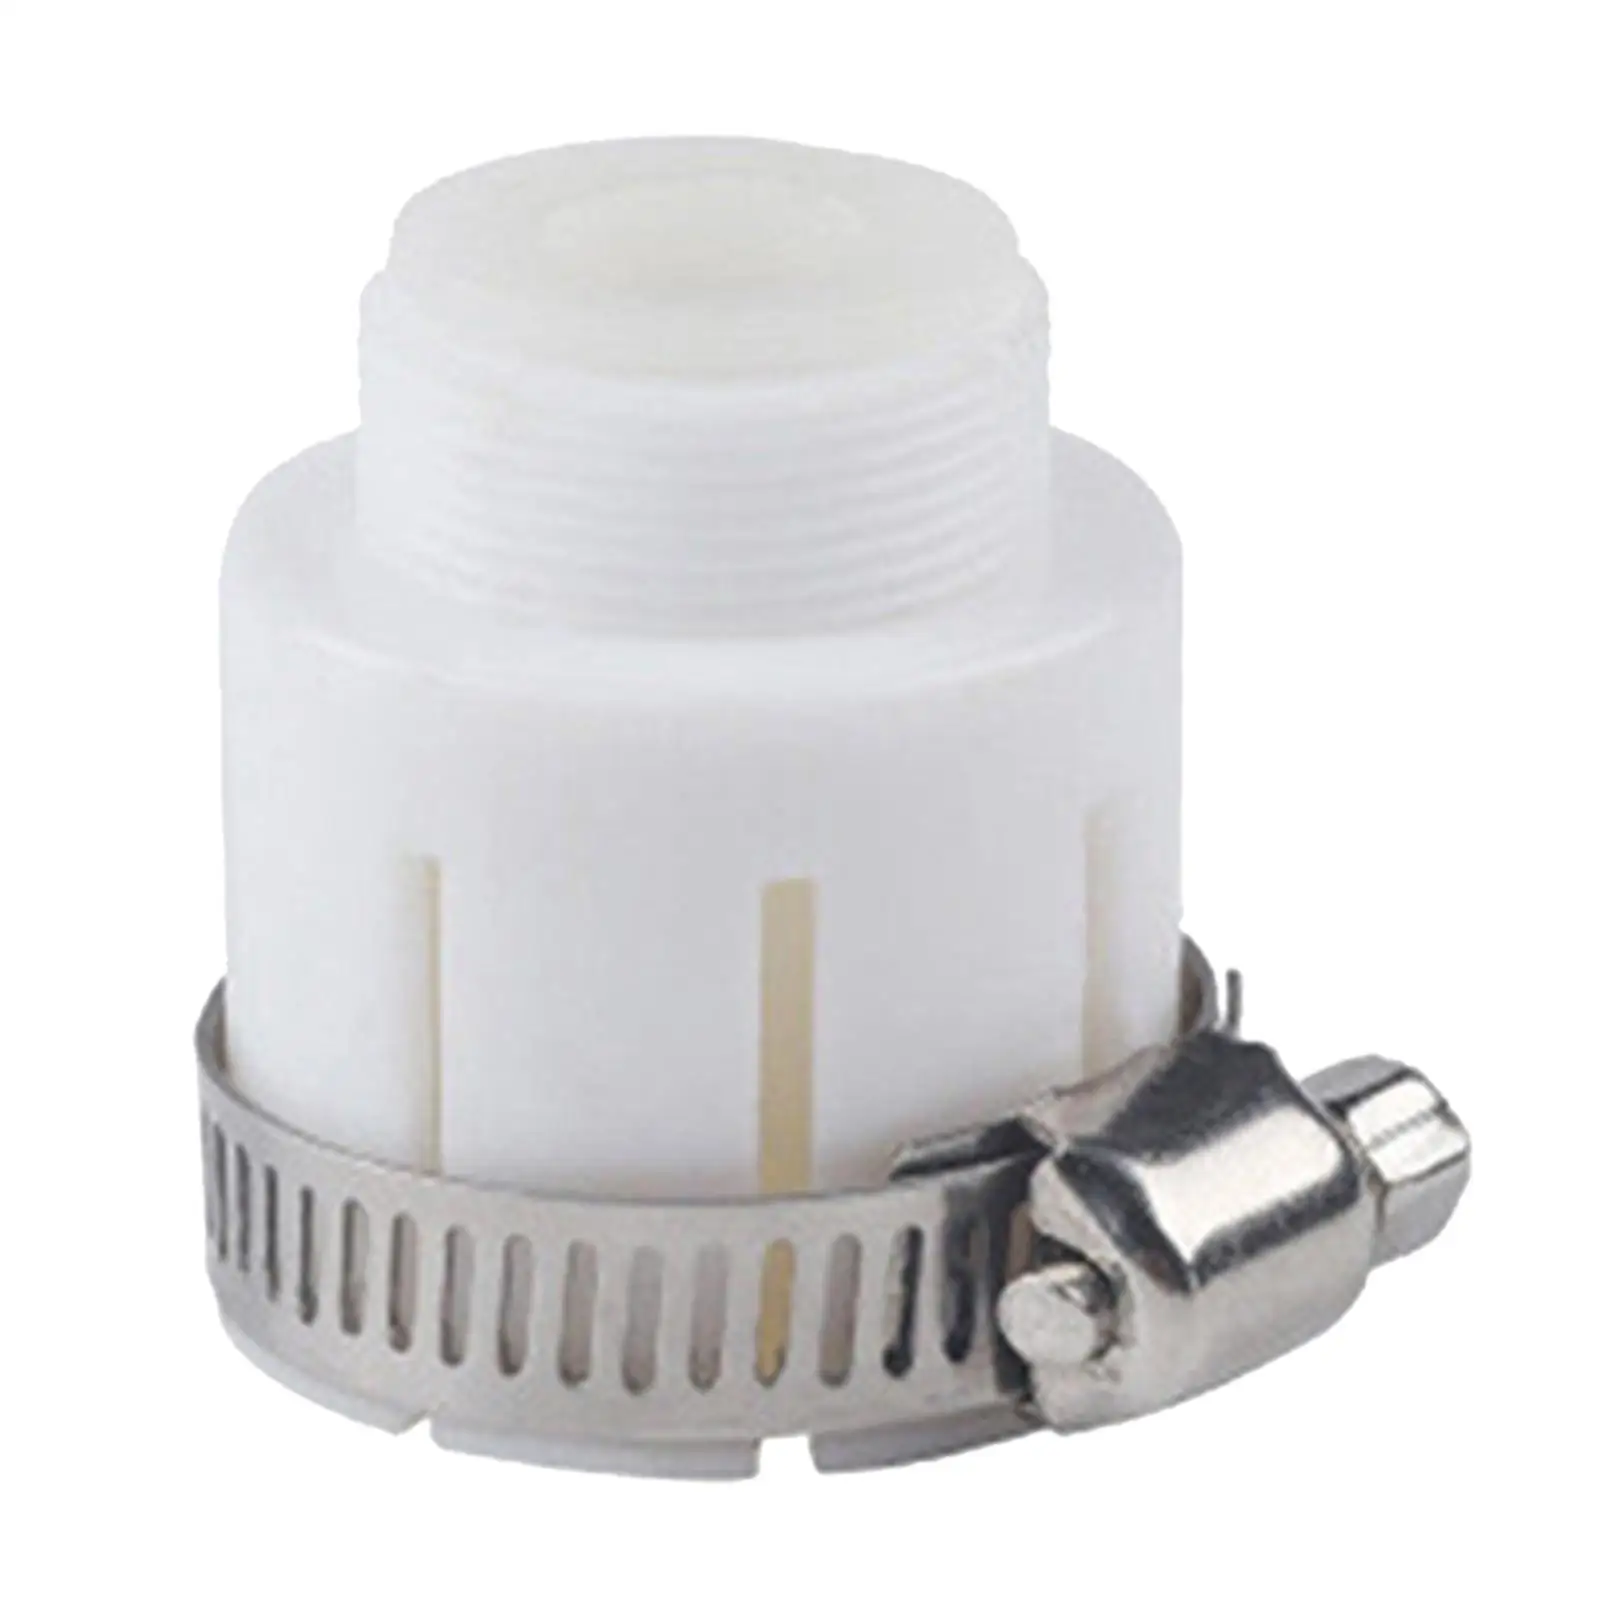 Faucet Aerator Adapter Faucet Adapter Faucet Connector for Bathroom Faucet